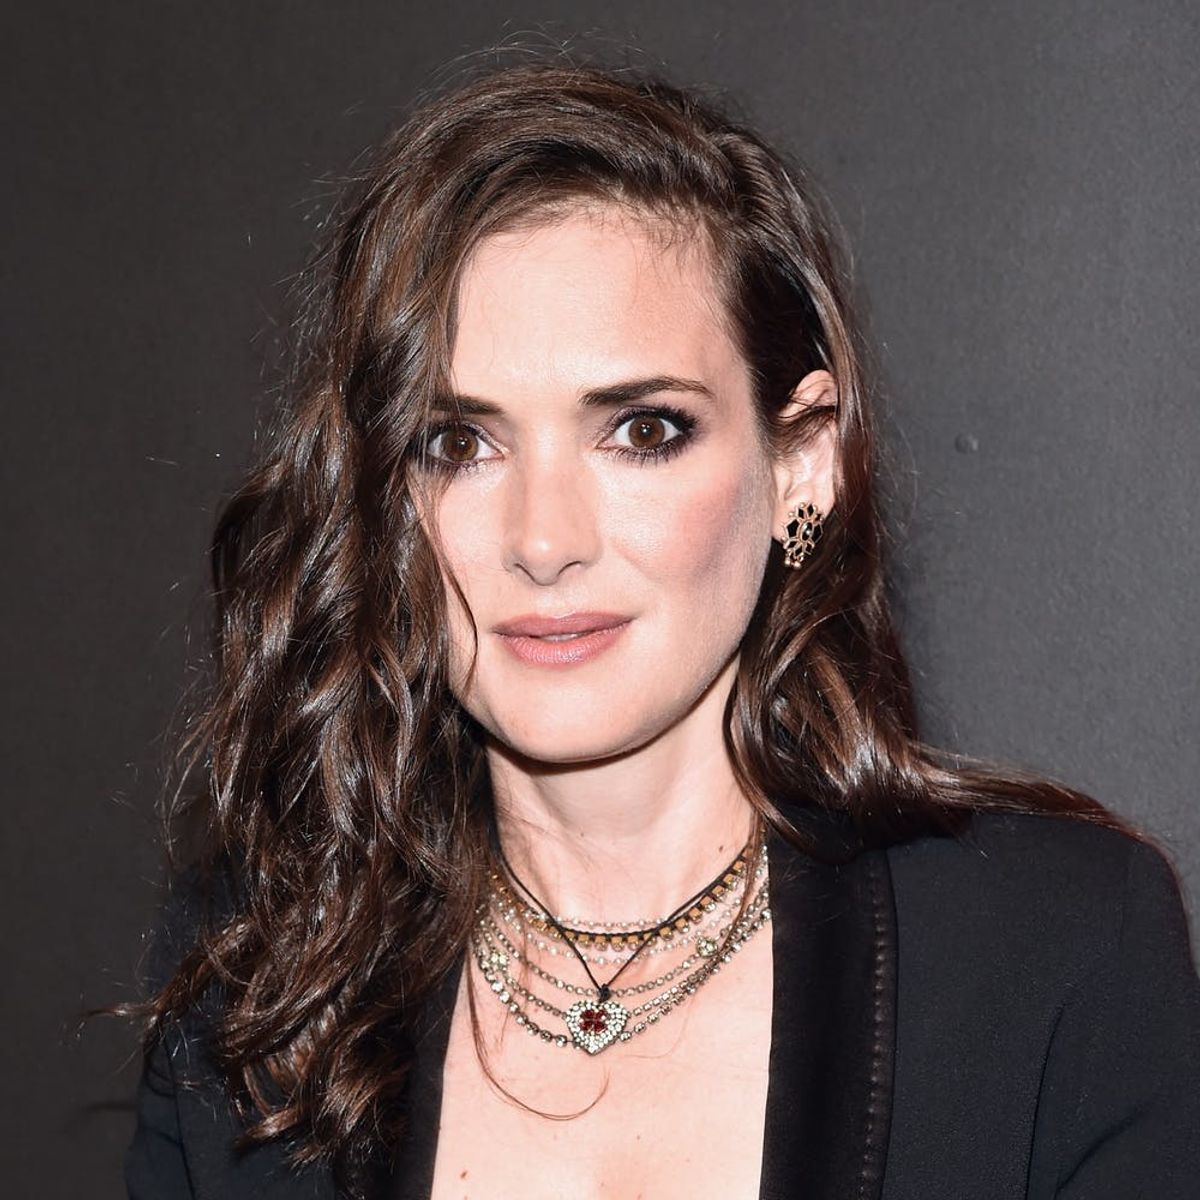 People Had Strong Feelings About the Winona Ryder L’Oréal Hair Commercial